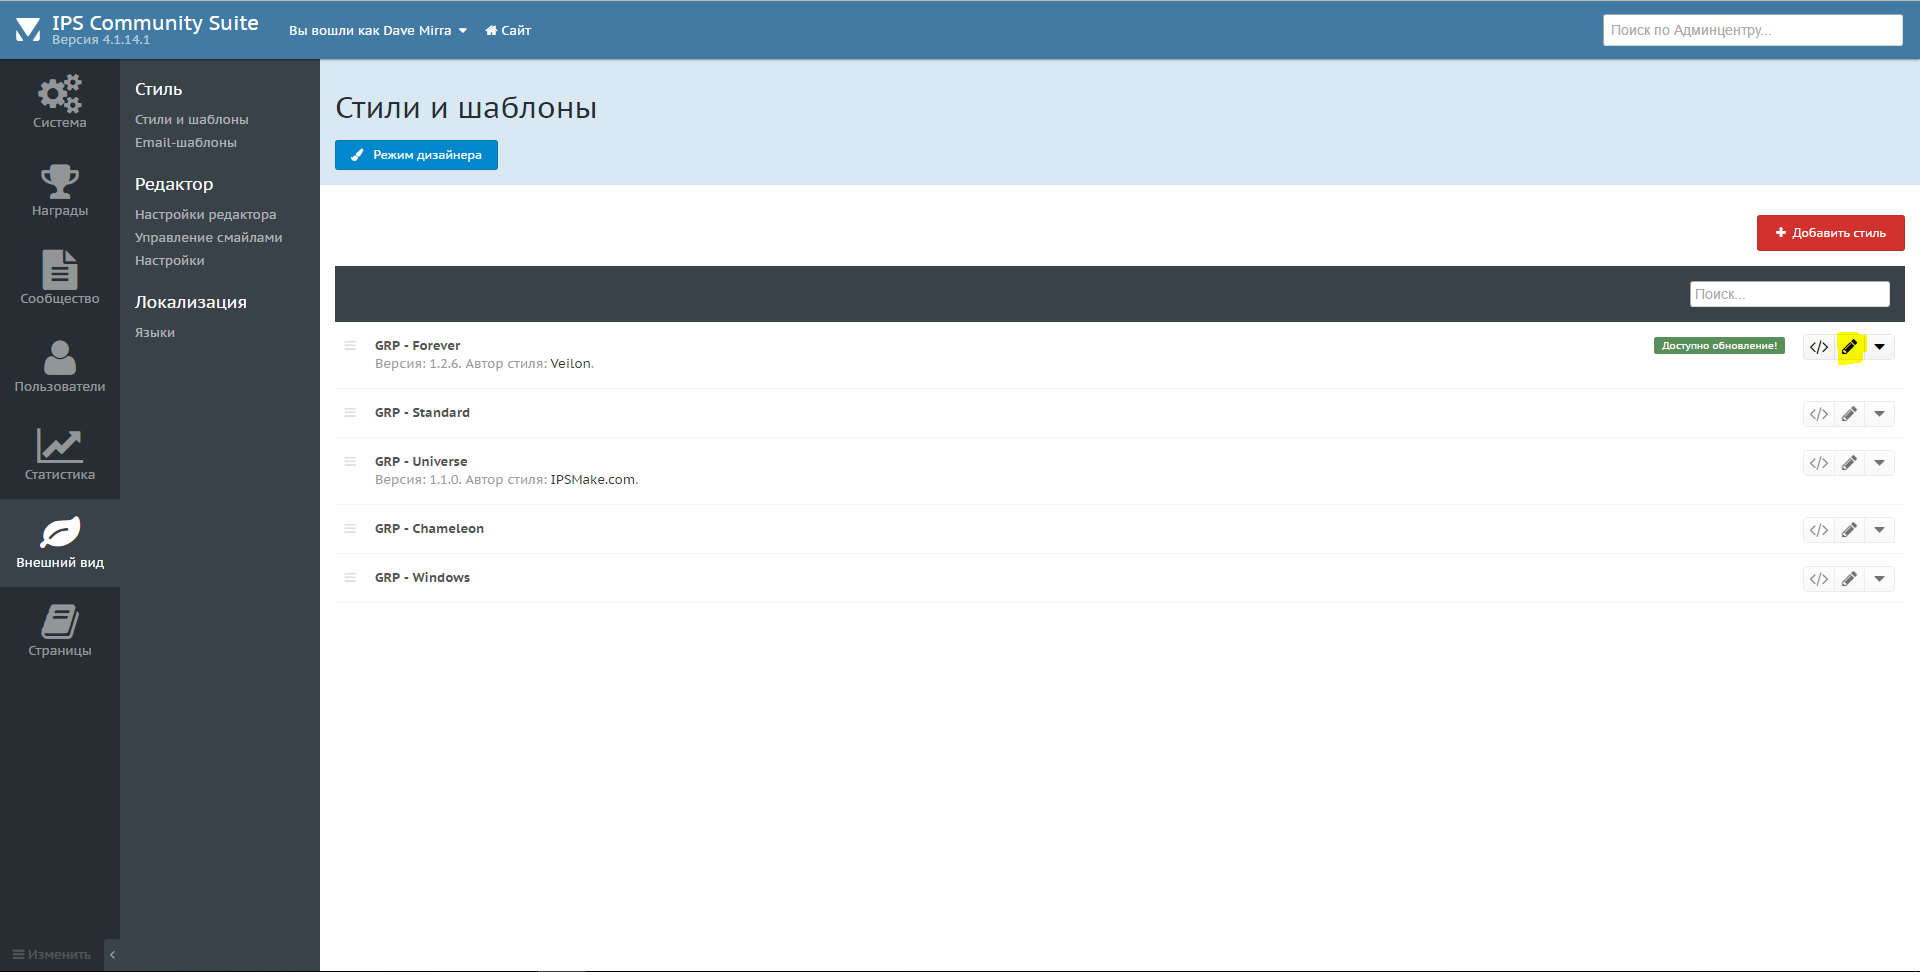 Forums forums php mod. IPS 4.7 XENFORO.